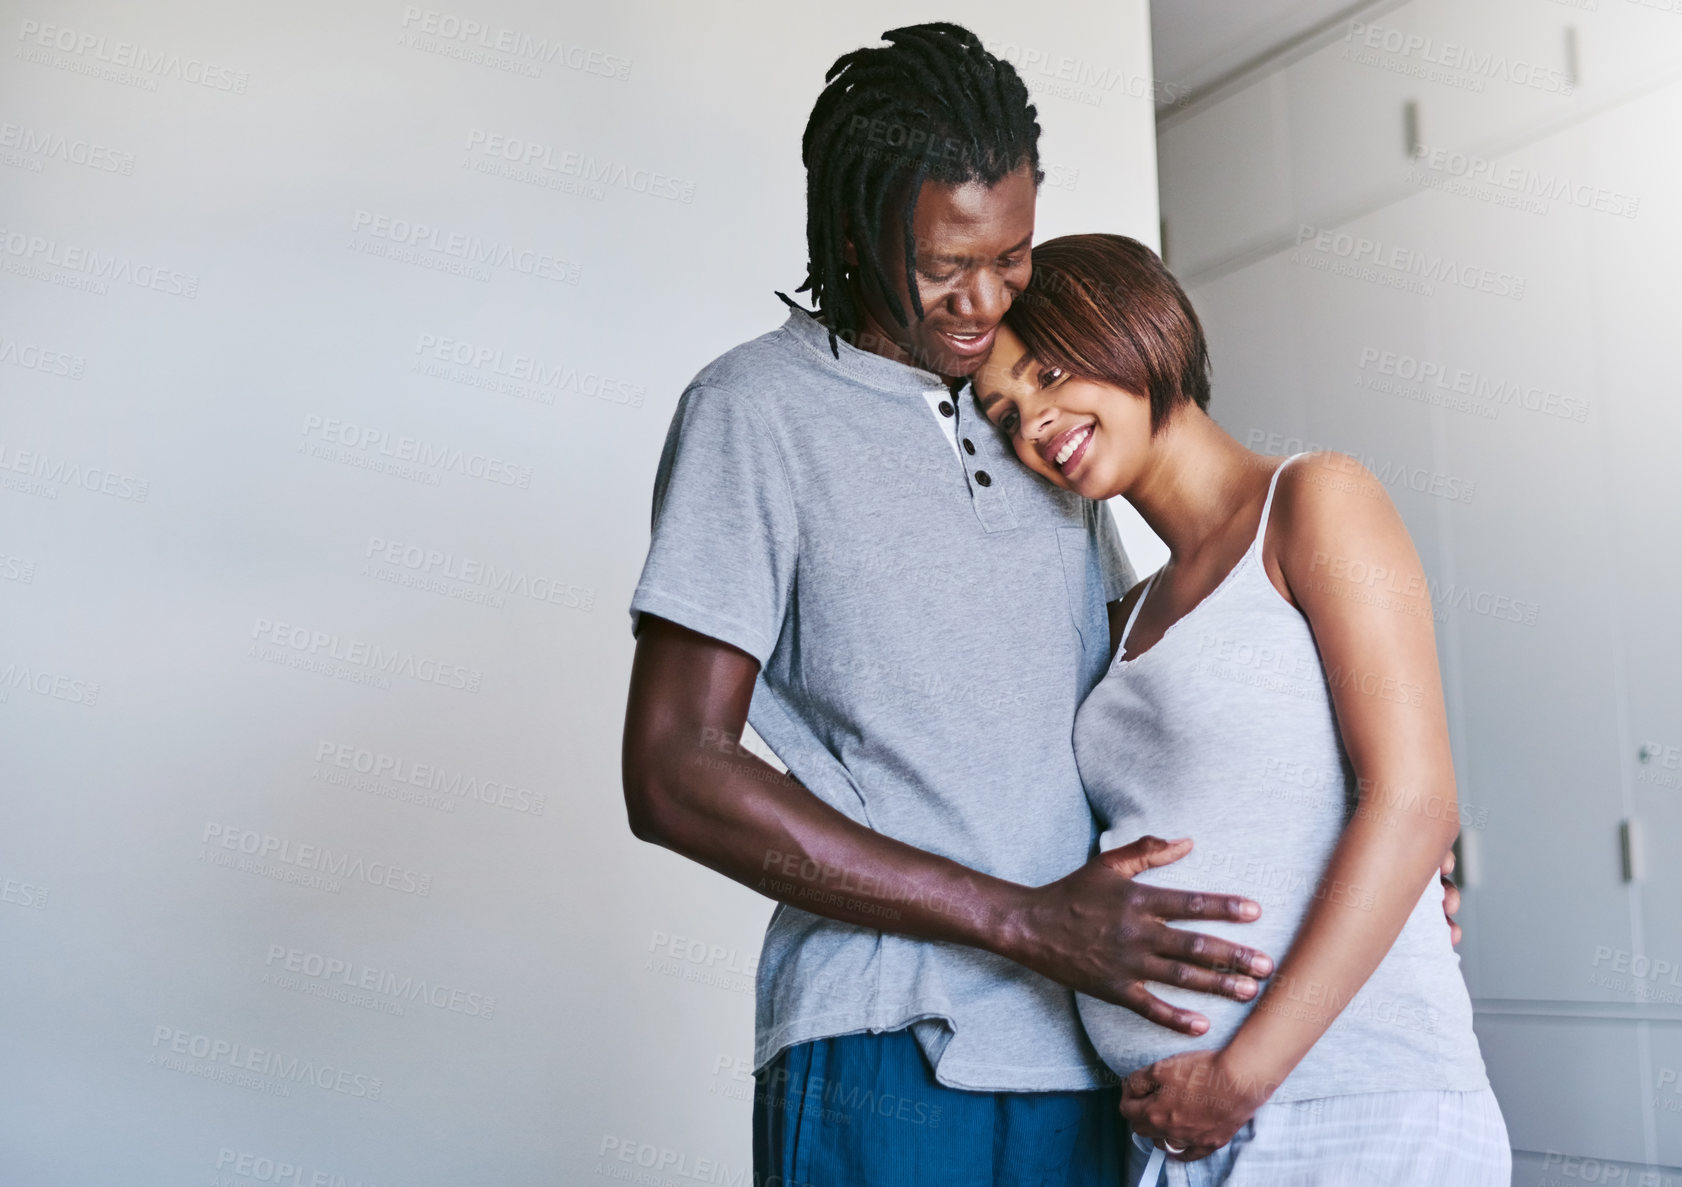 Buy stock photo Shot of a young man touching his pregnant wife's belly